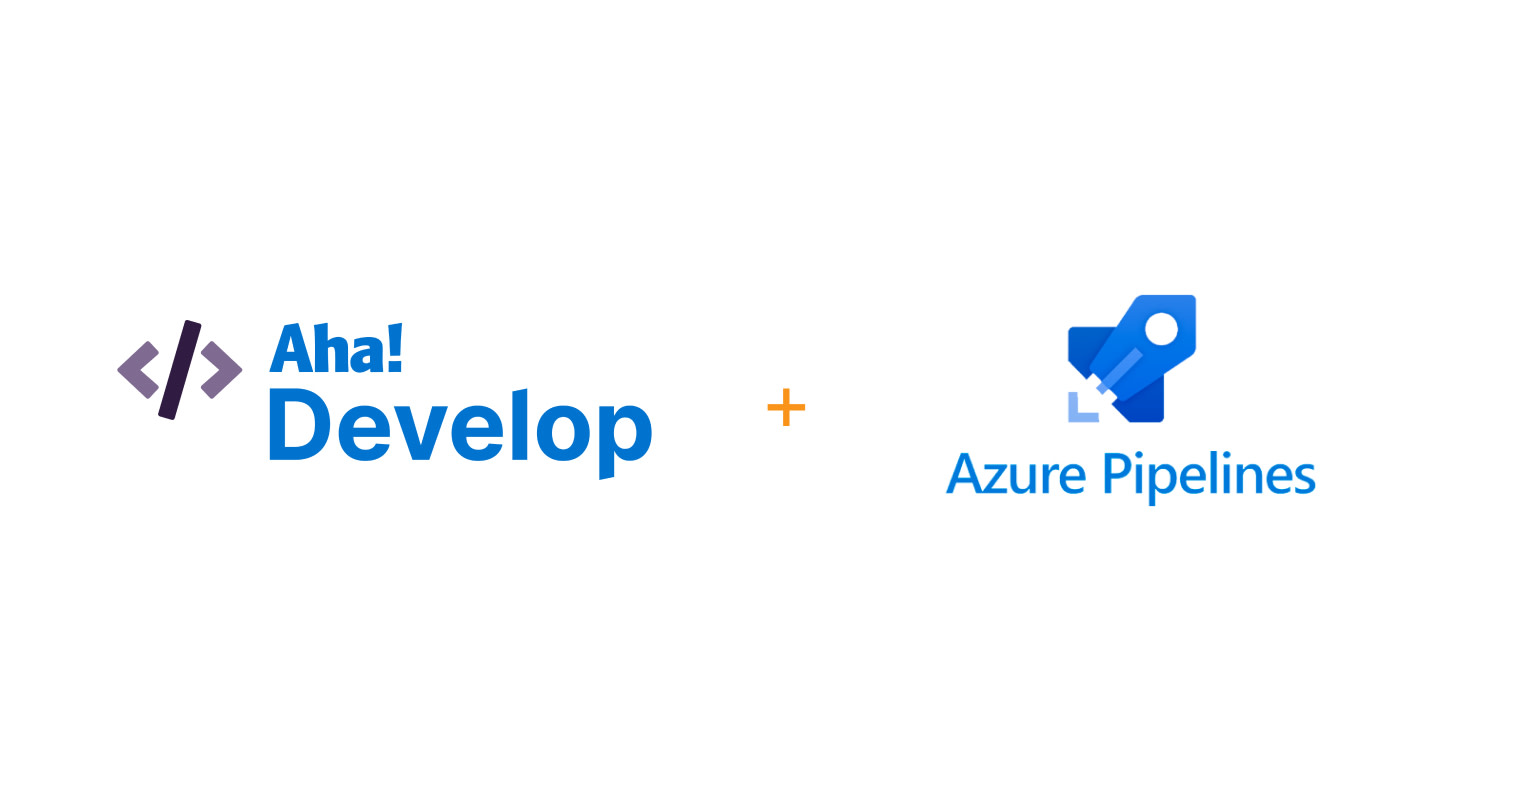 New Azure Pipelines Extension For Aha! Develop